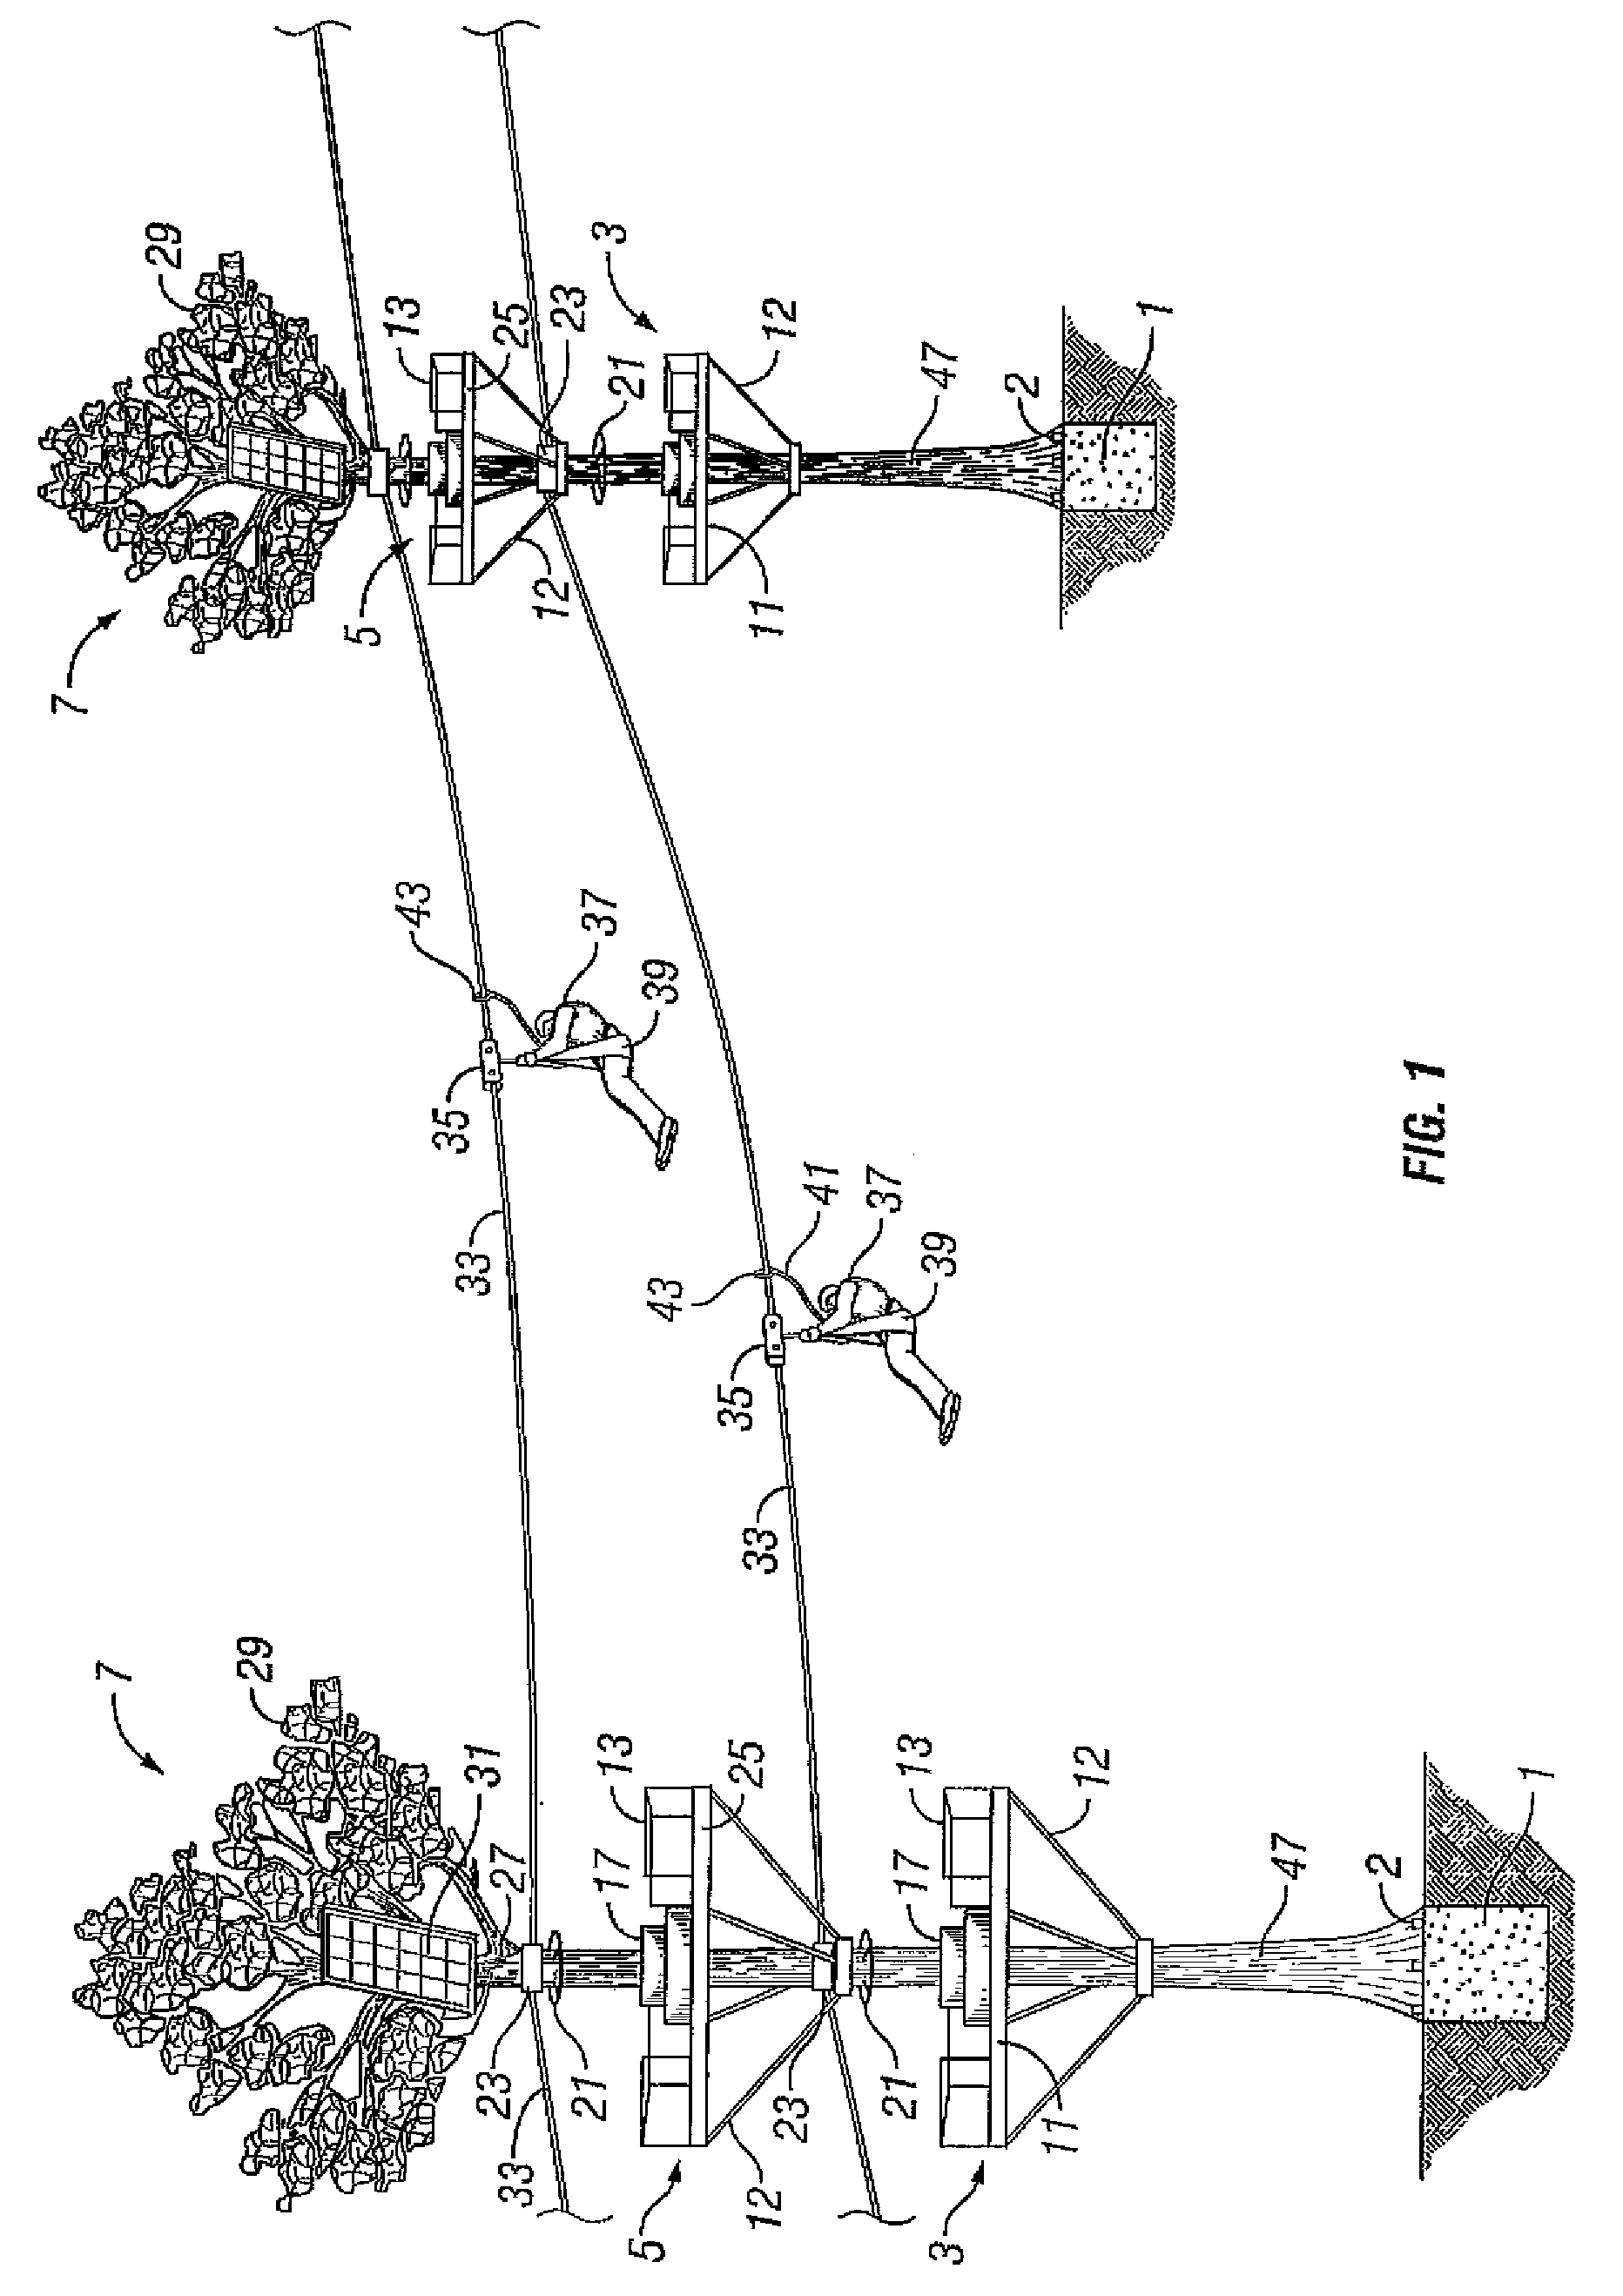 System for tower- and cable-based transportation structure